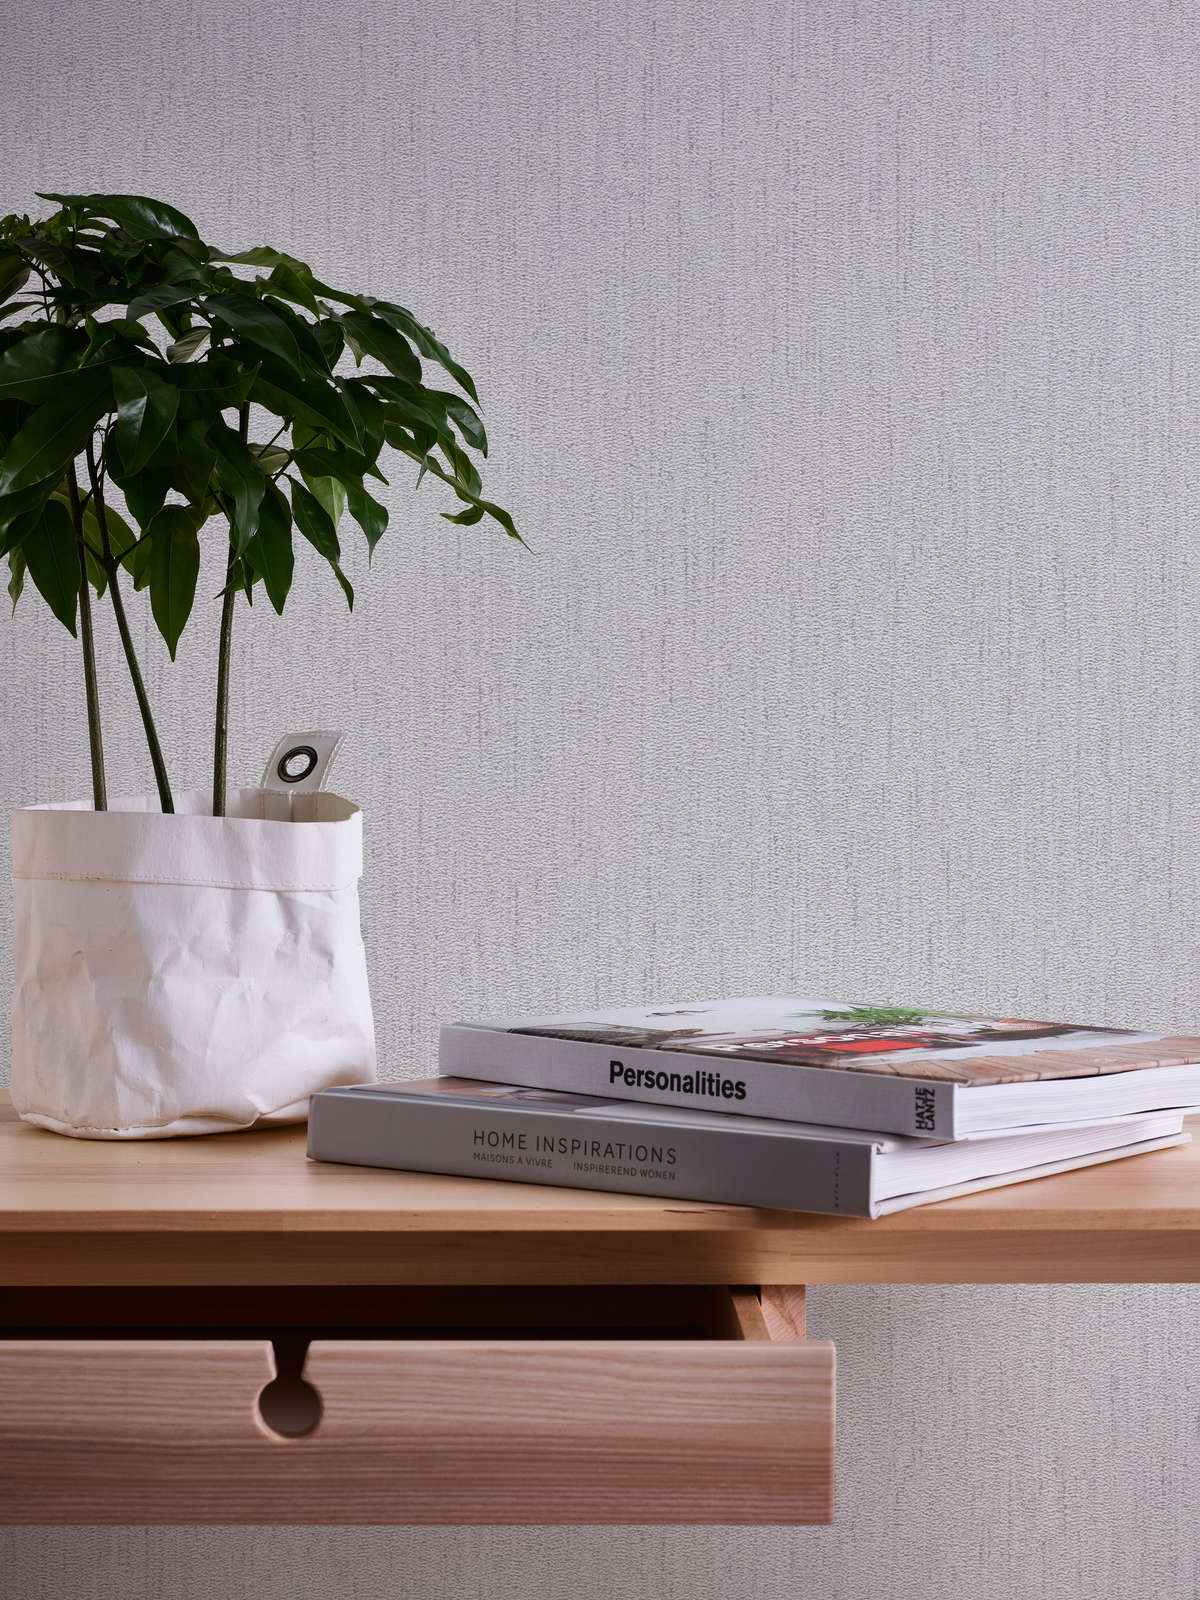             Textured wallpaper with fabric pattern - light grey, silver
        